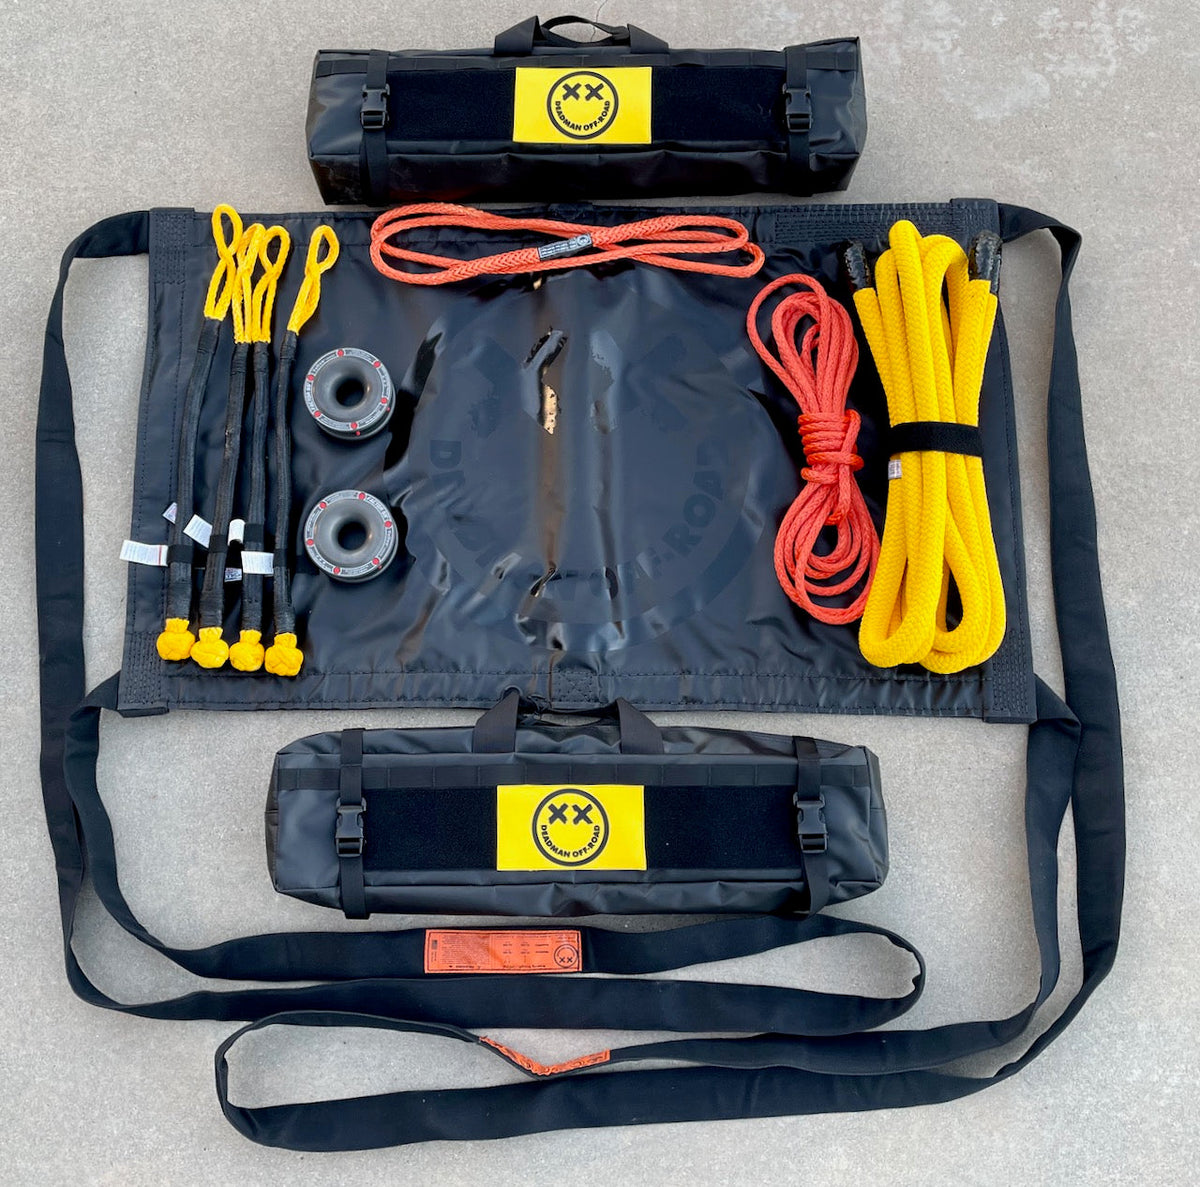 The Recovery Nerd Ruggedized Recovery Nerd Kit - 7/8" x 20' Stretchy Band - $1323.93 Recovery Gear Deadman Off-Road- Overland Kitted